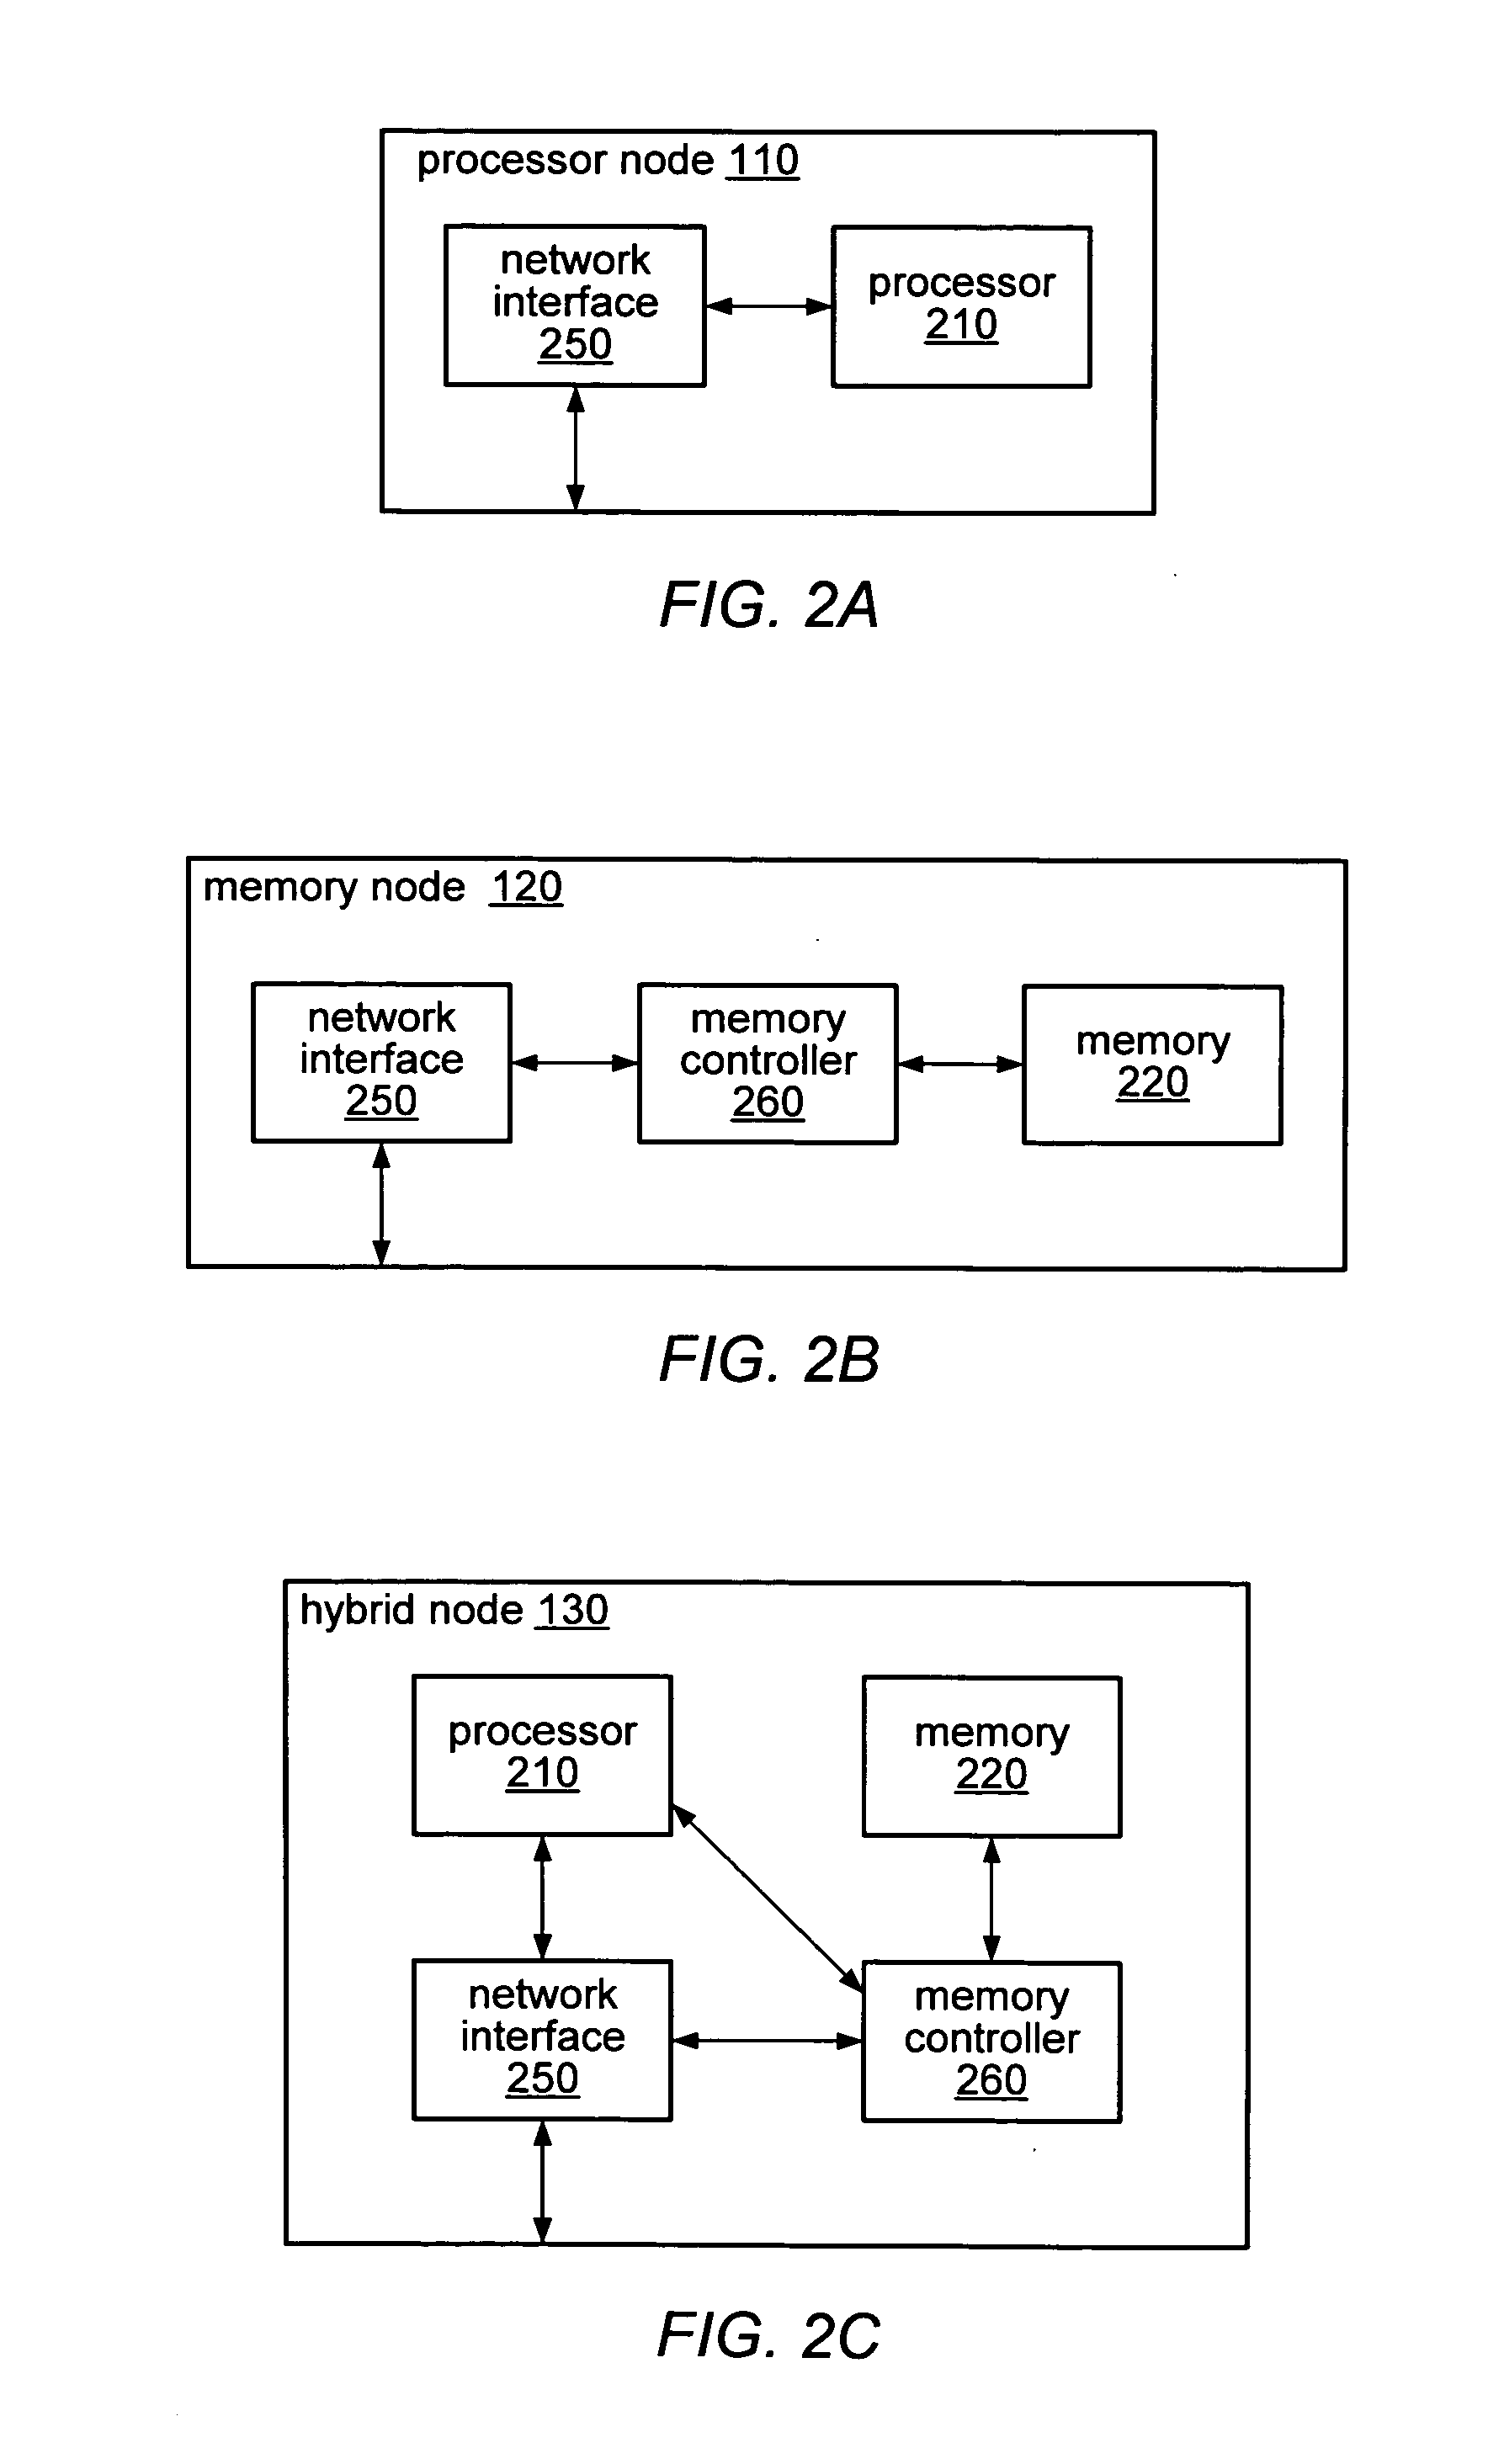 Proximity-based memory allocation in a distributed memory system